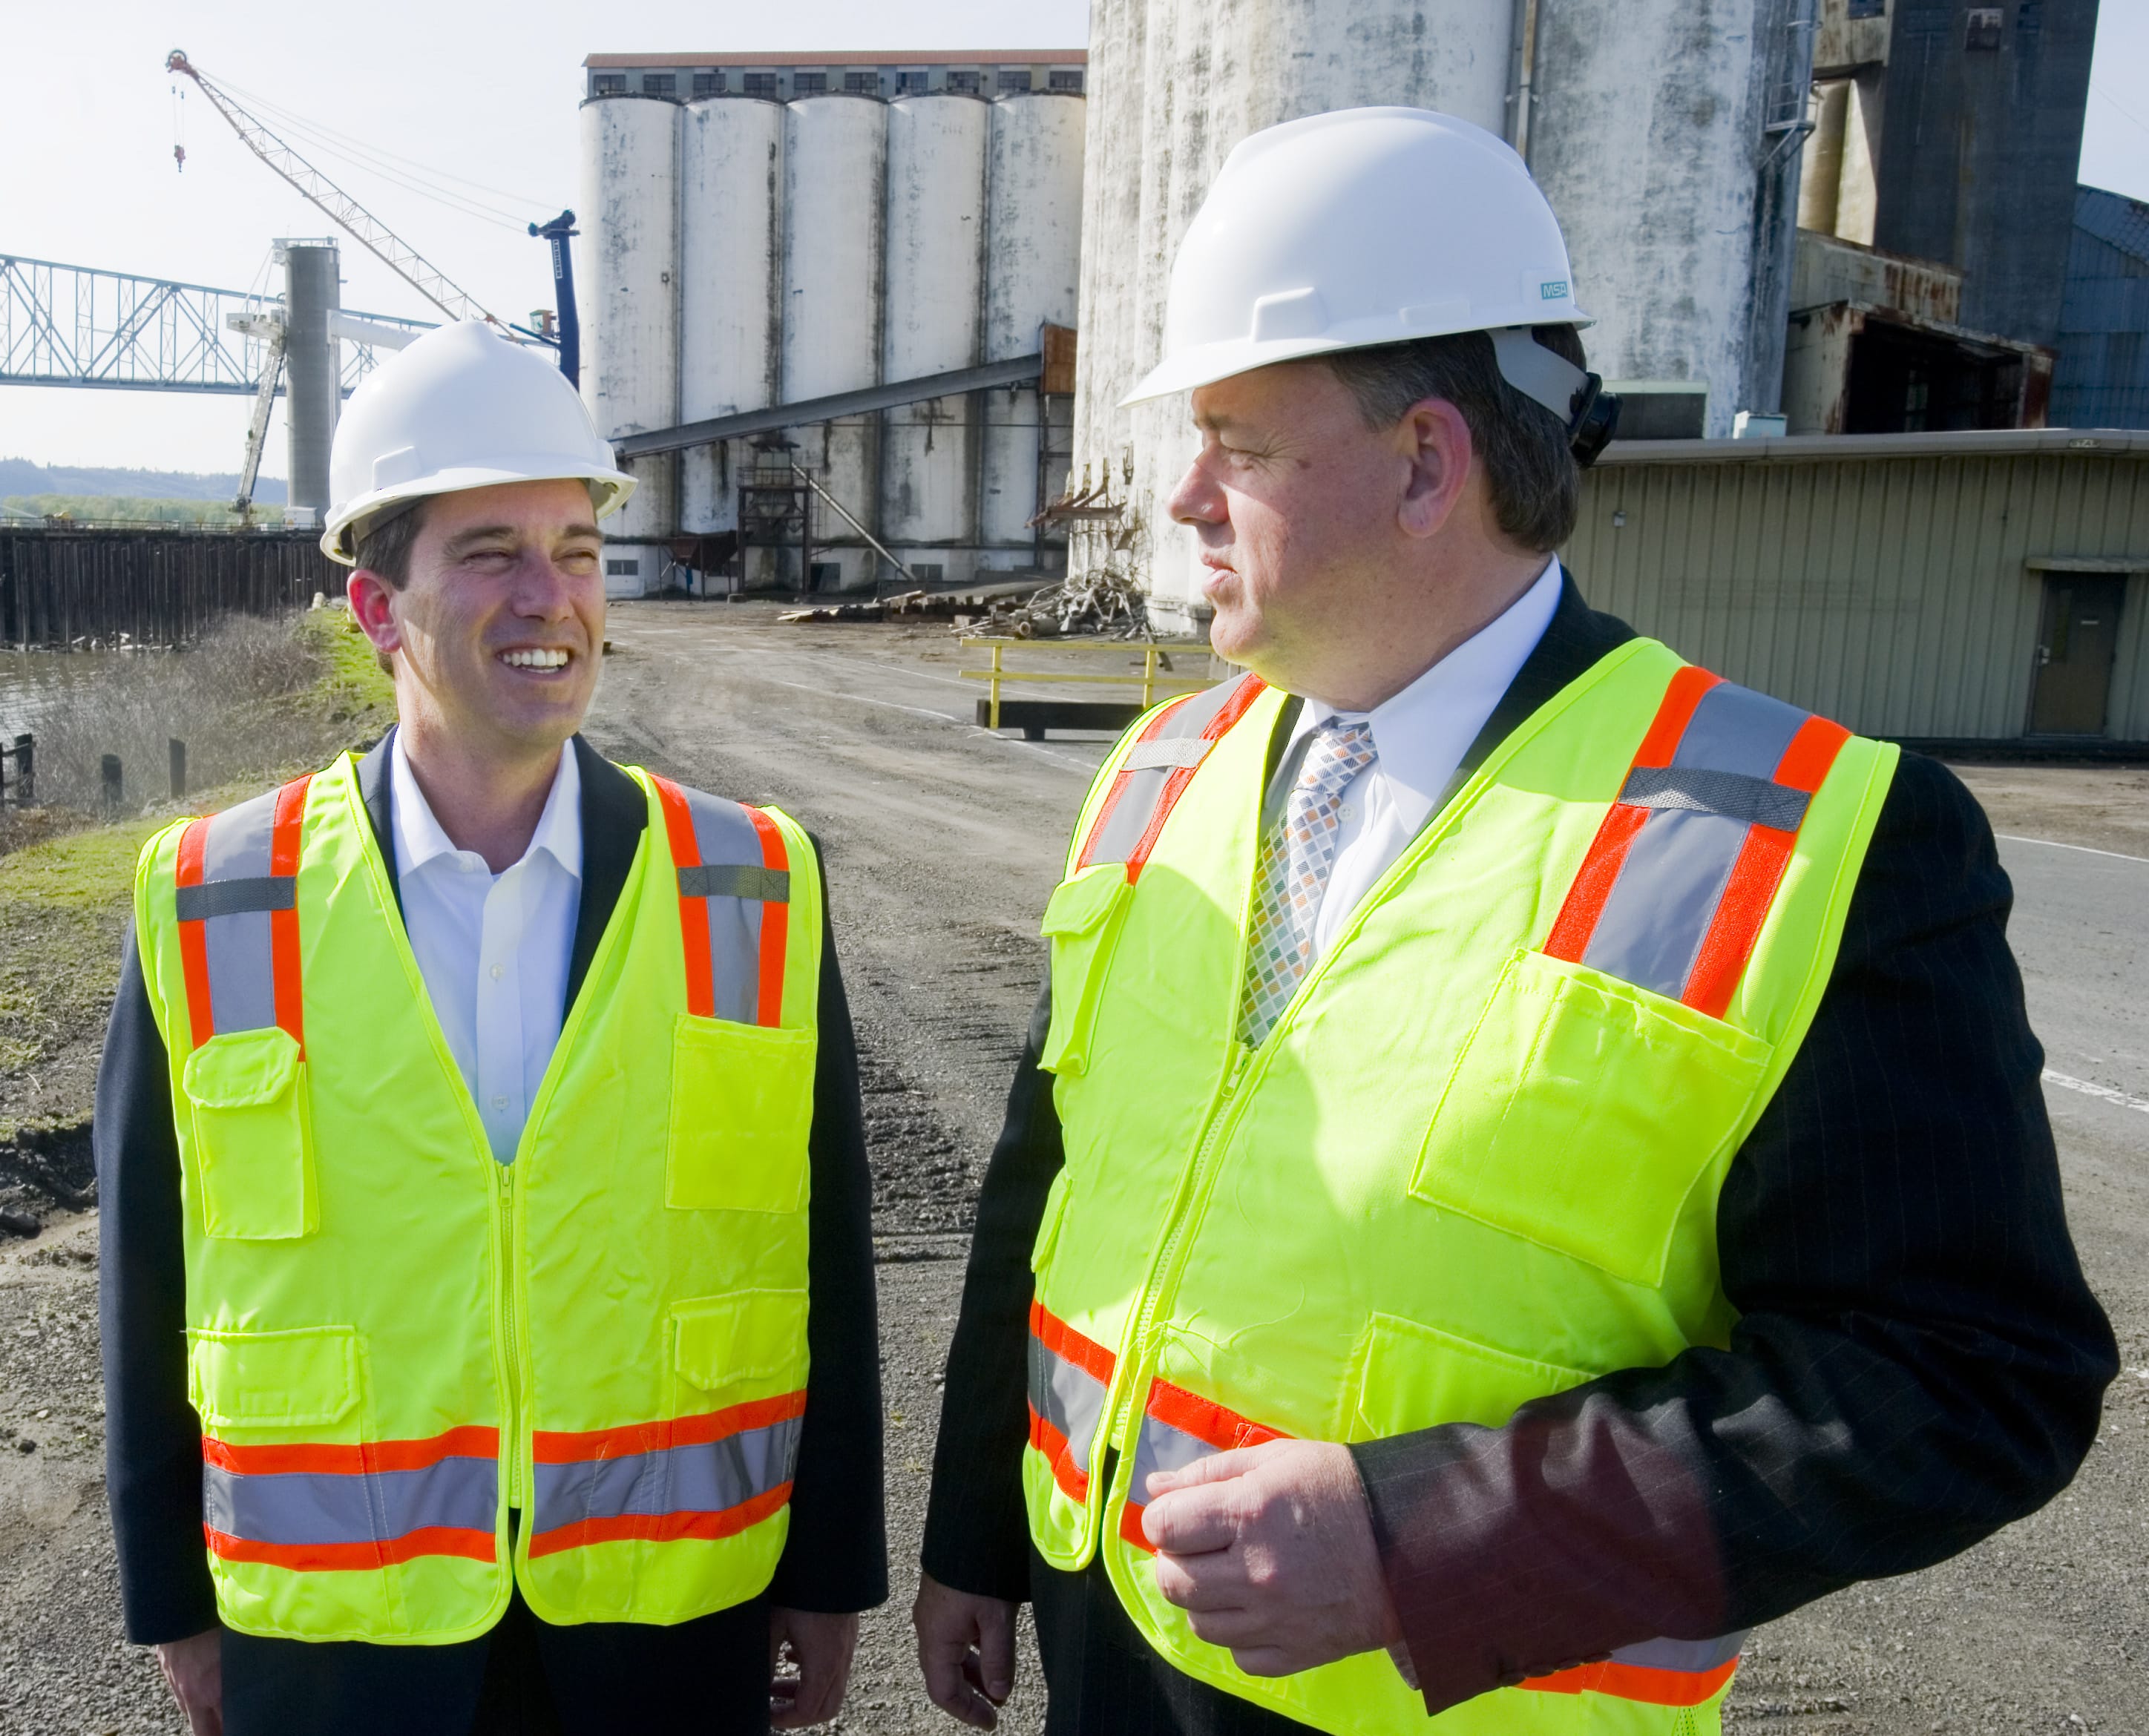 Haven Energy President Greg Bowles, left, and Port of Longview Director Gier Kalhagen walk near Berth 4, the proposed site of a propane and butane export terminal Bowles' company hopes to build and operate.